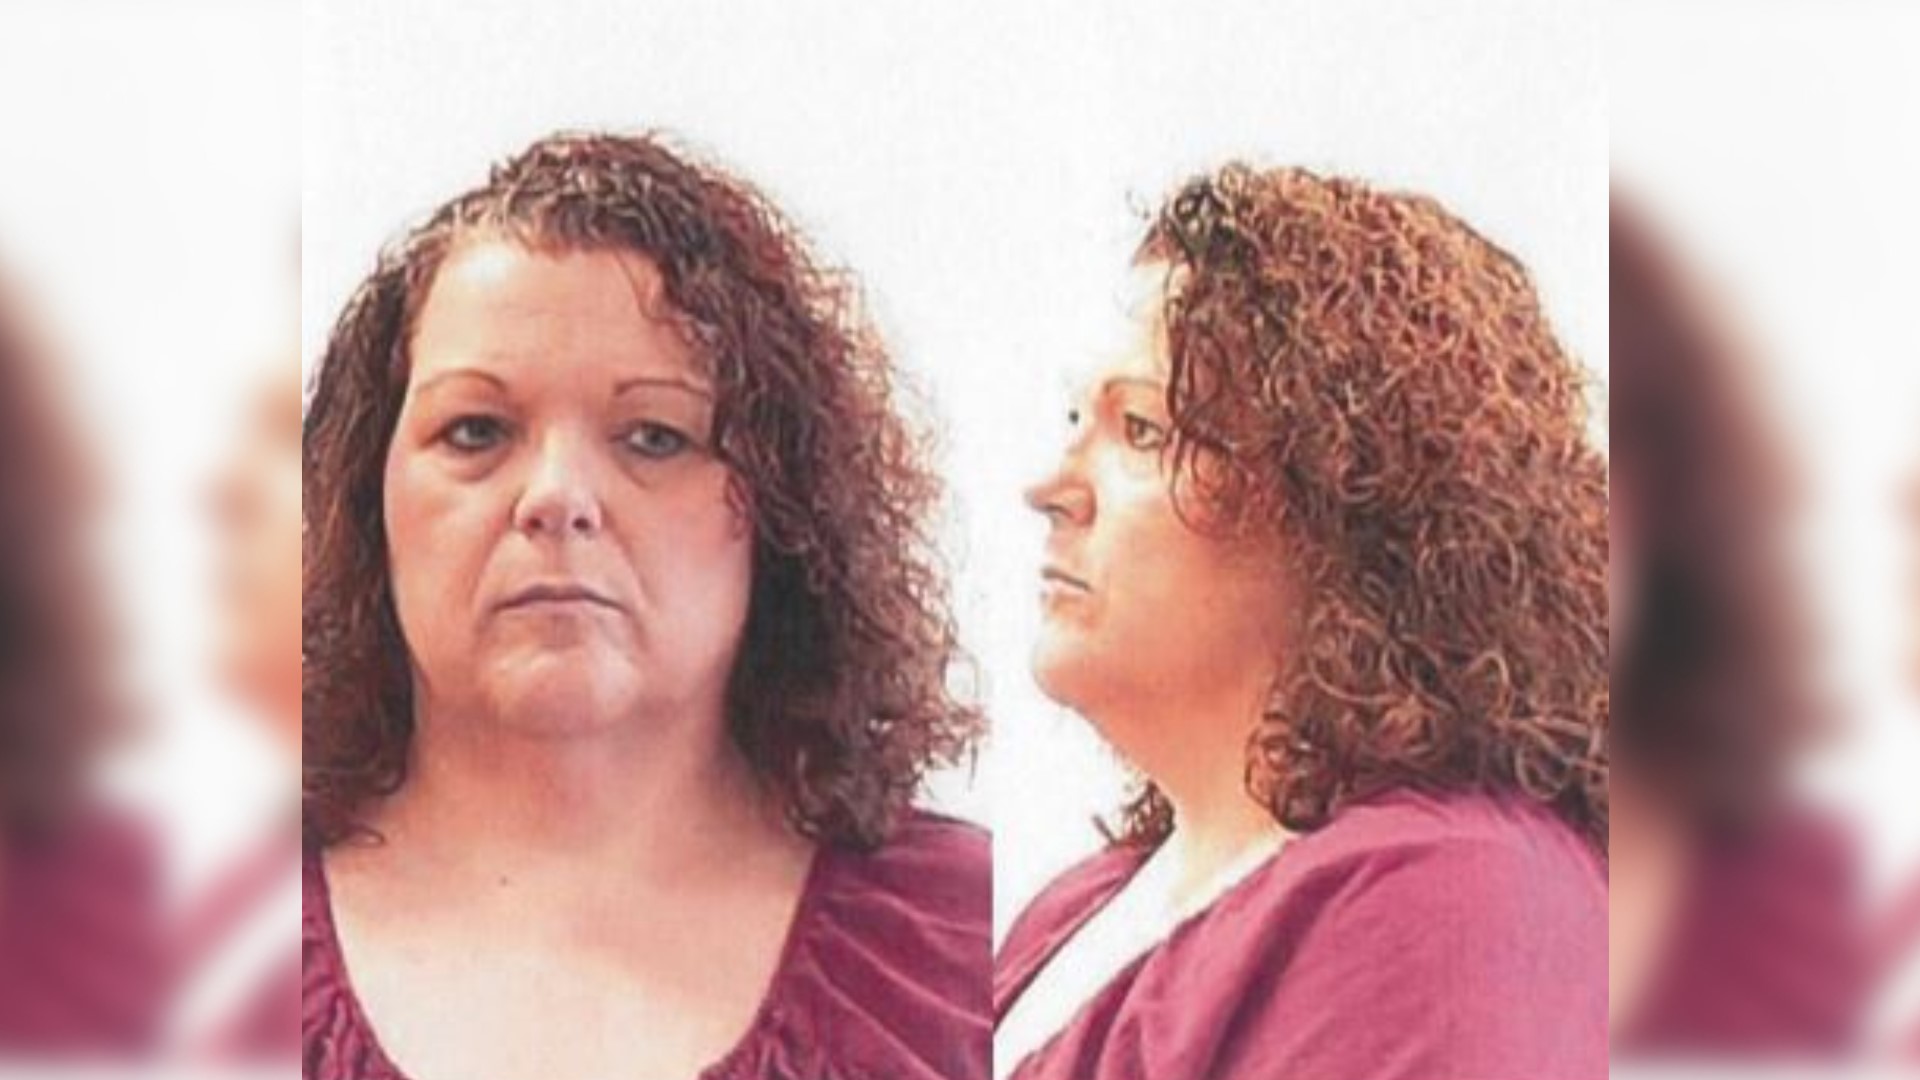 A federal grand jury indicted Sheila F. Bowden on 19 counts of mail fraud and 23 counts of bank fraud on Tuesday.